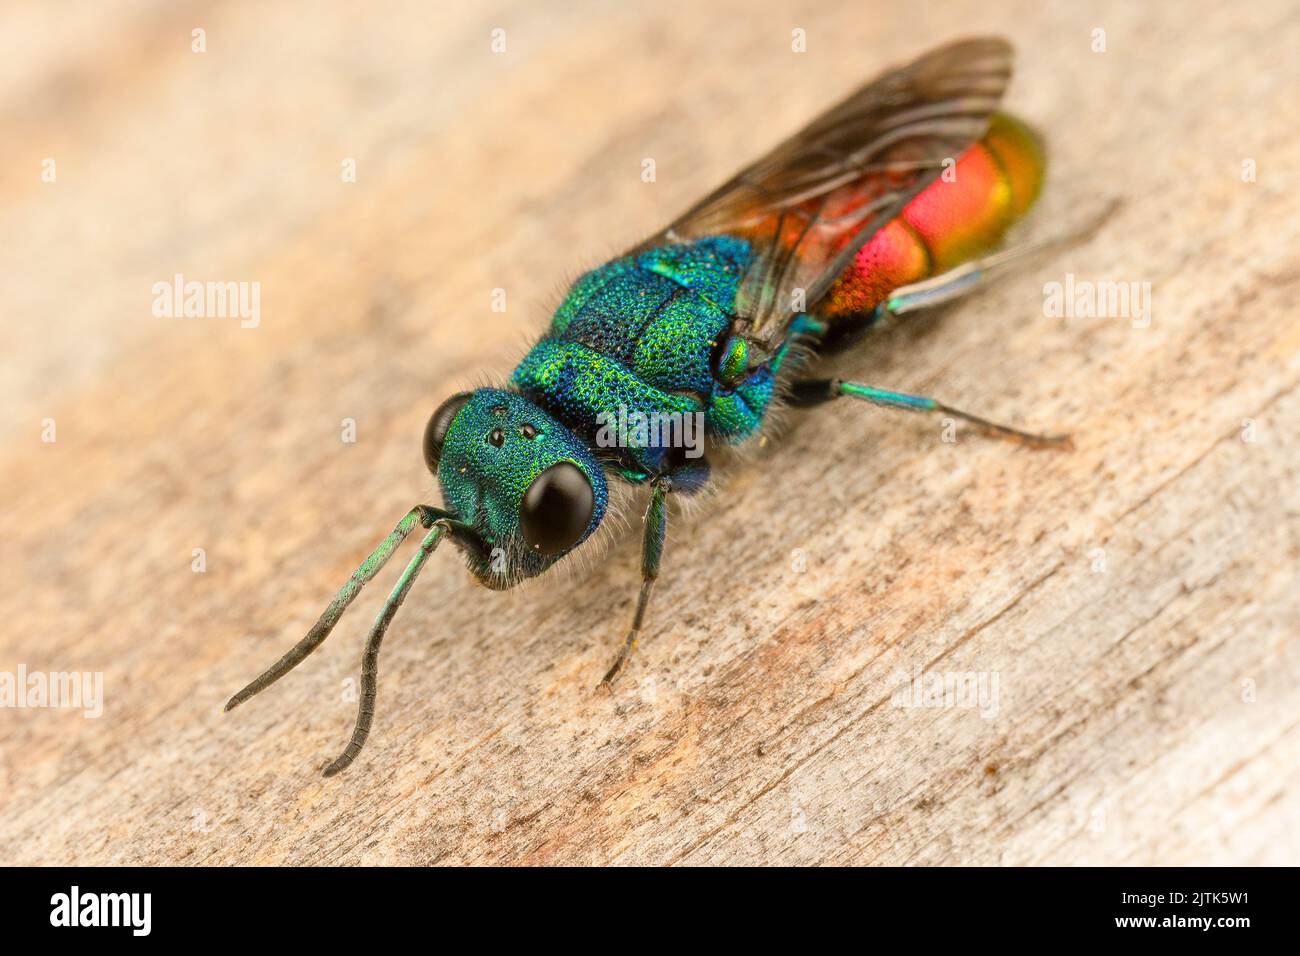 A spectacular metallic ruby-tailed (parasitic) wasp. Stock Photo